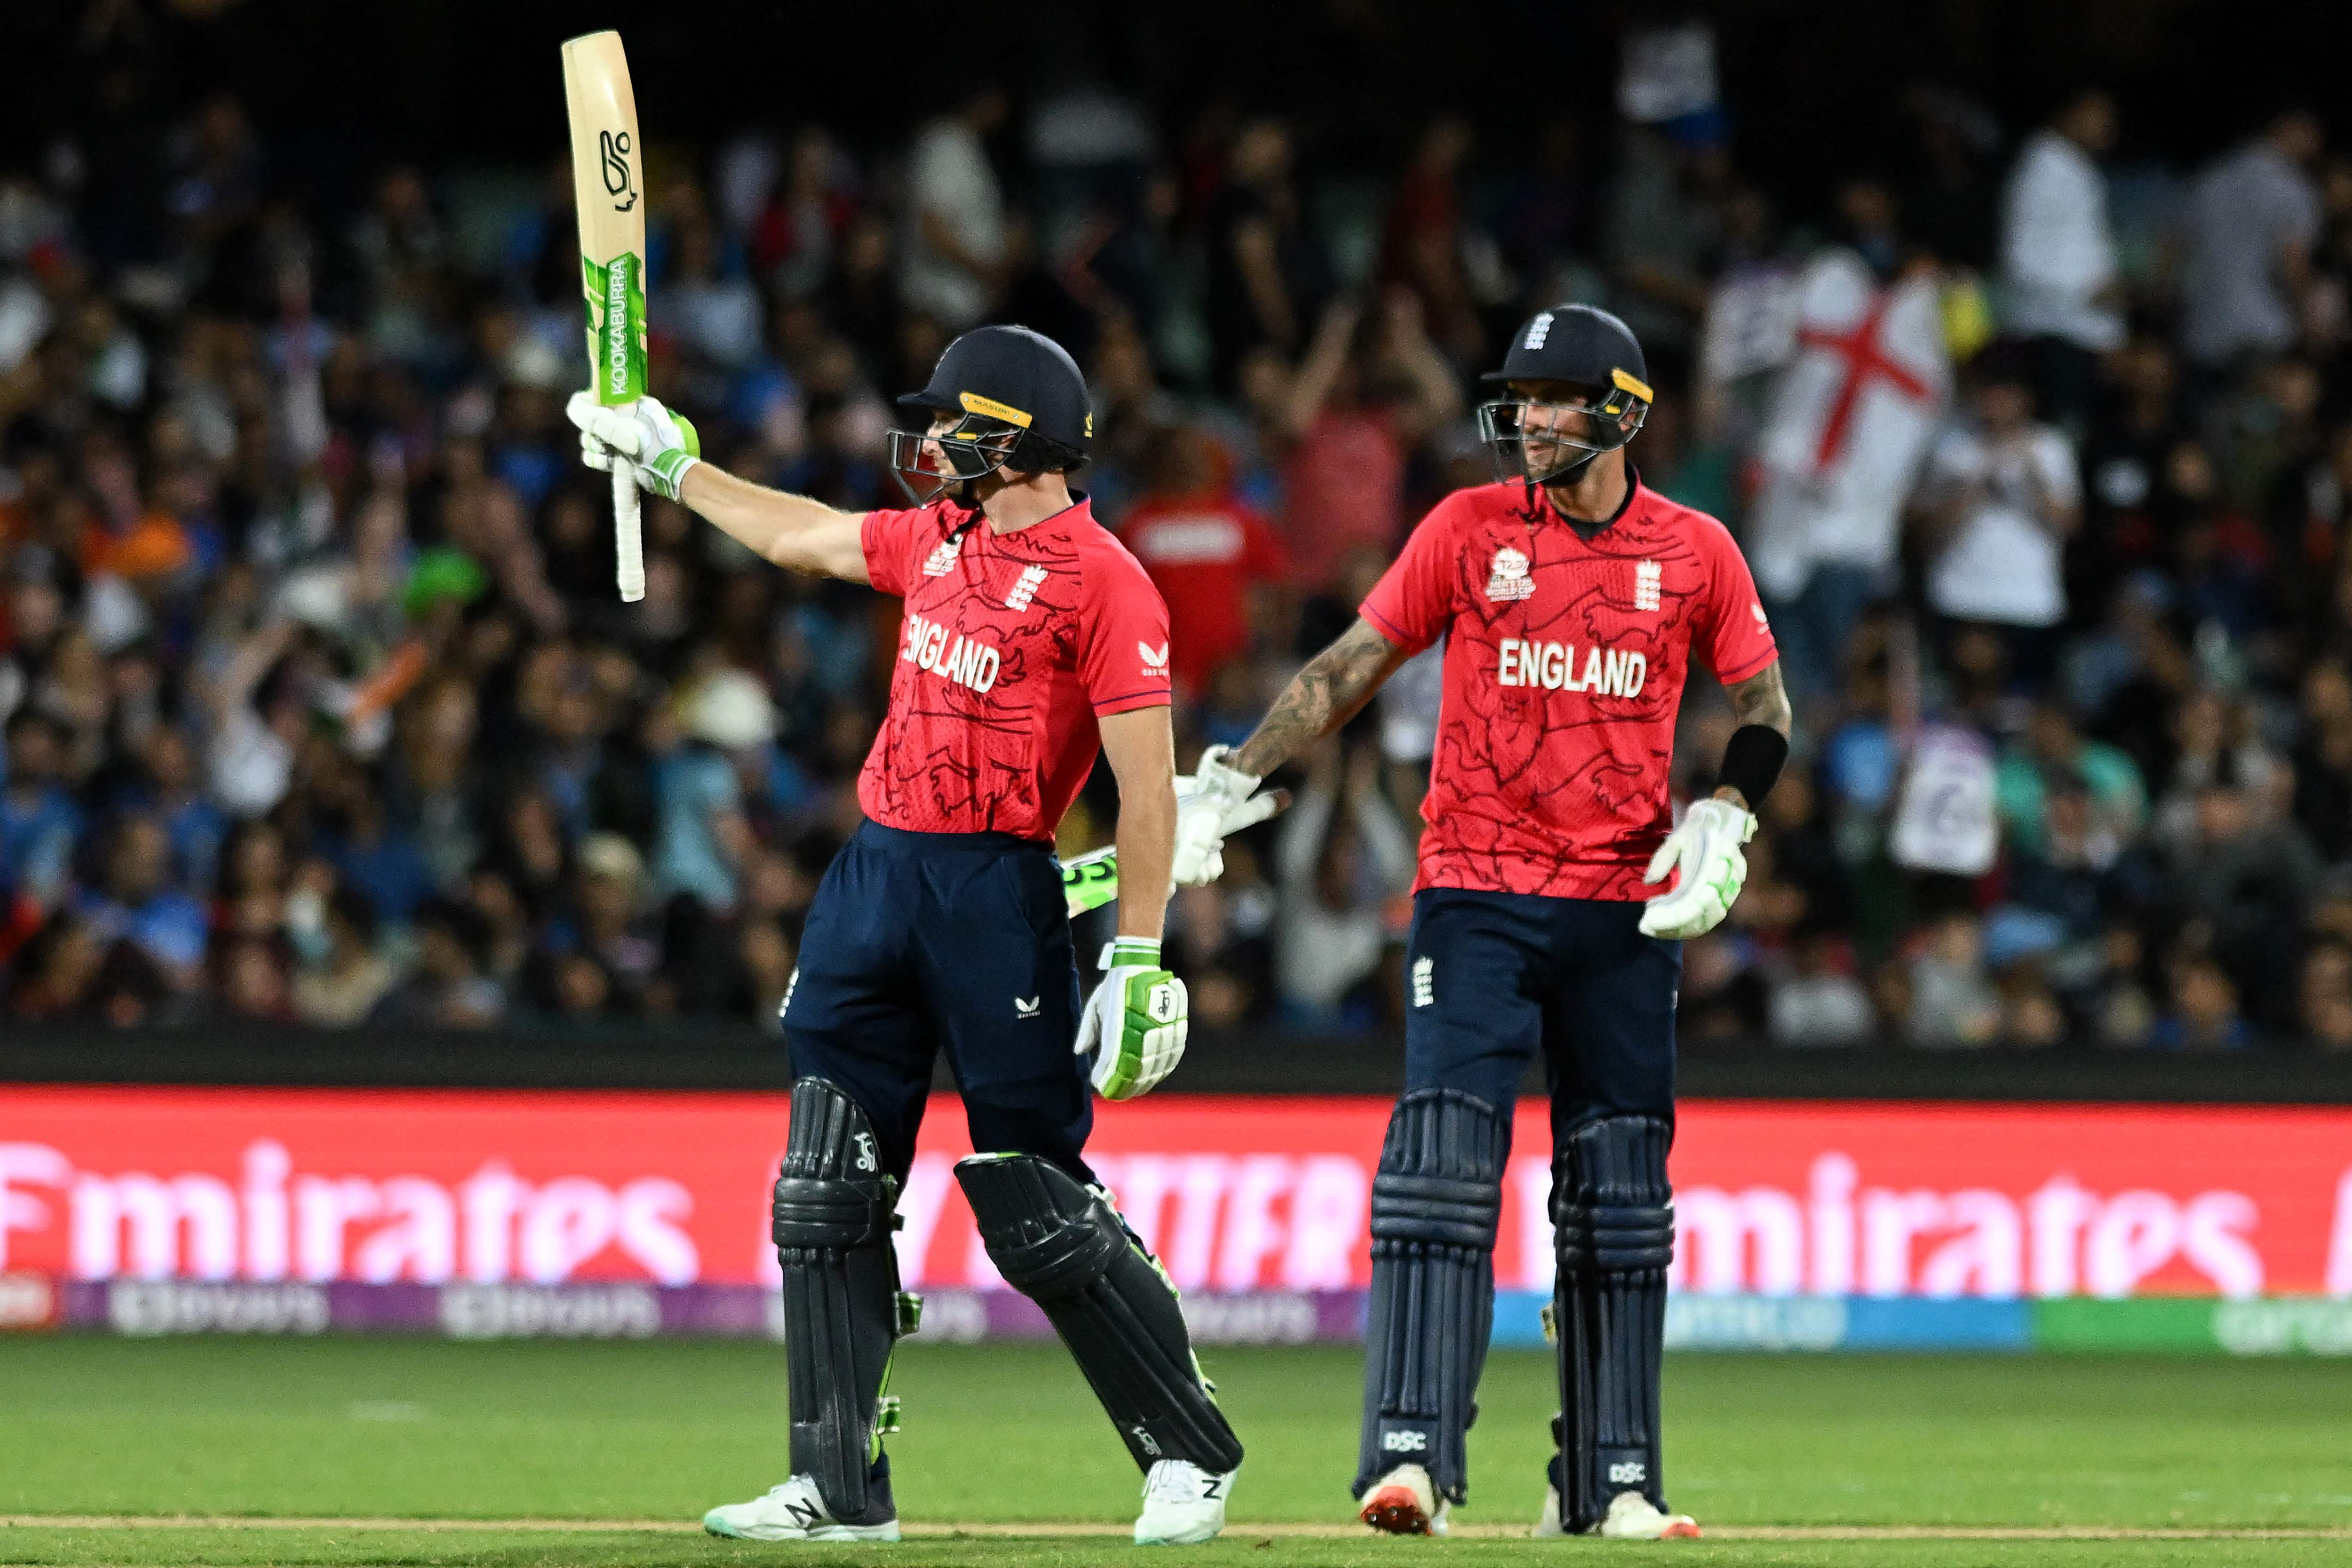 , England cruise into T20 World Cup final after smashing India as Alex Hales and Buttler star with bat to face Pakistan